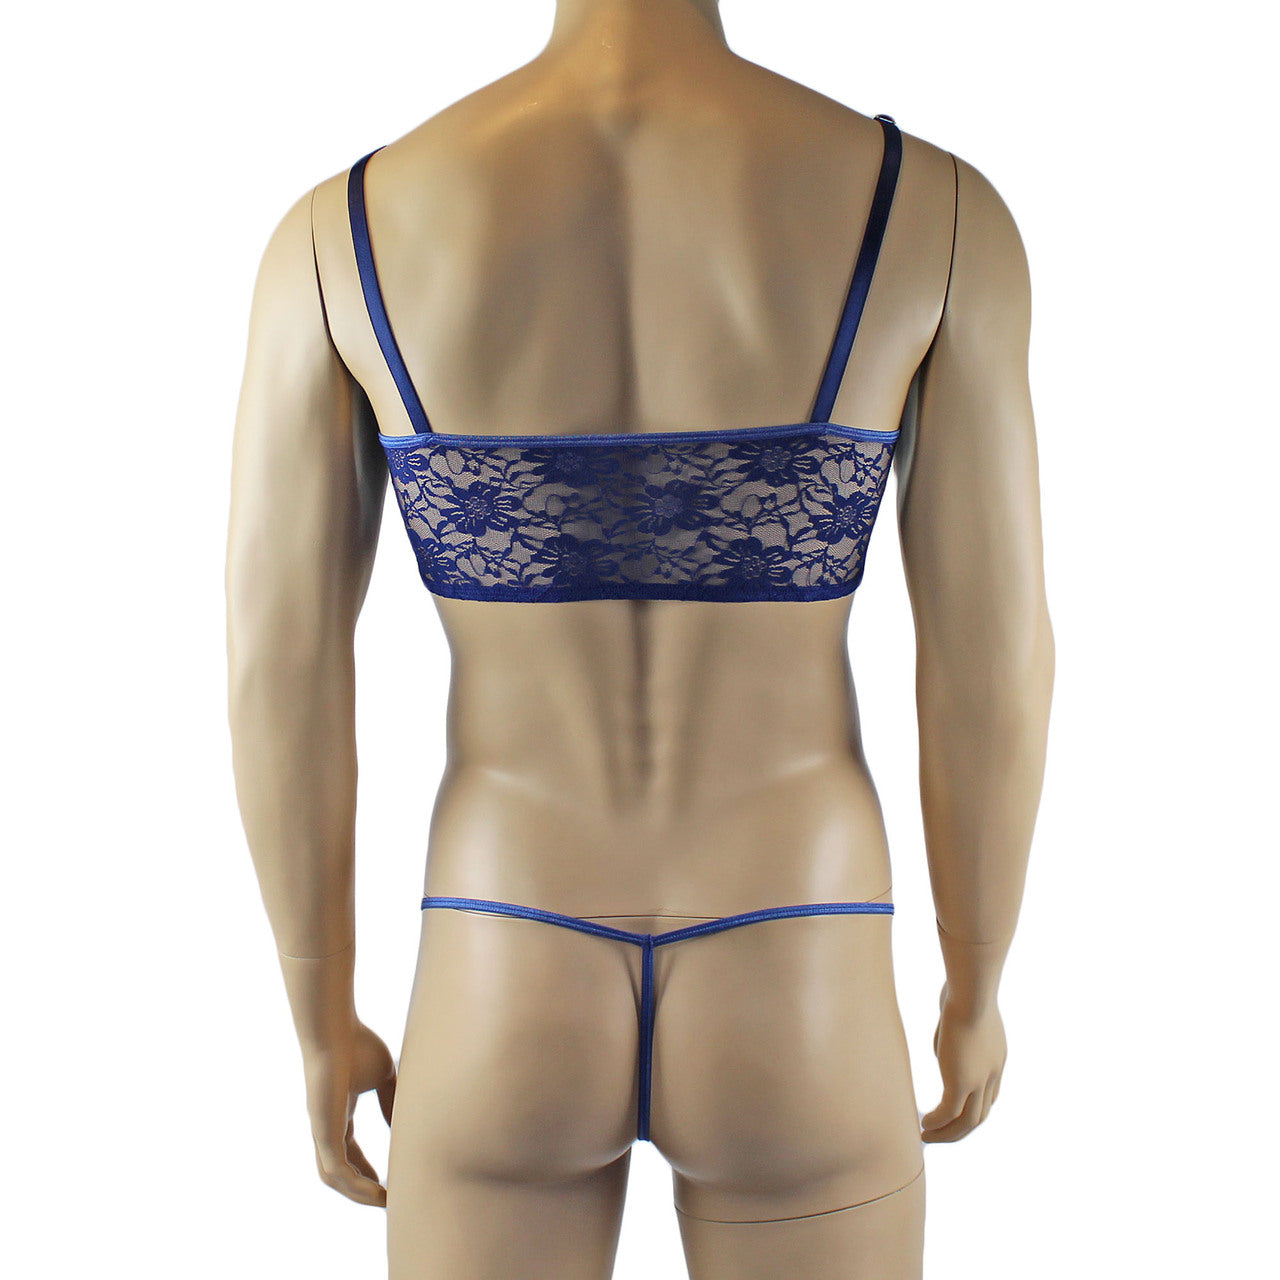 Mens Lace Crop Bra Top Camisole and G string Male Lingerie (navy plus other colours)